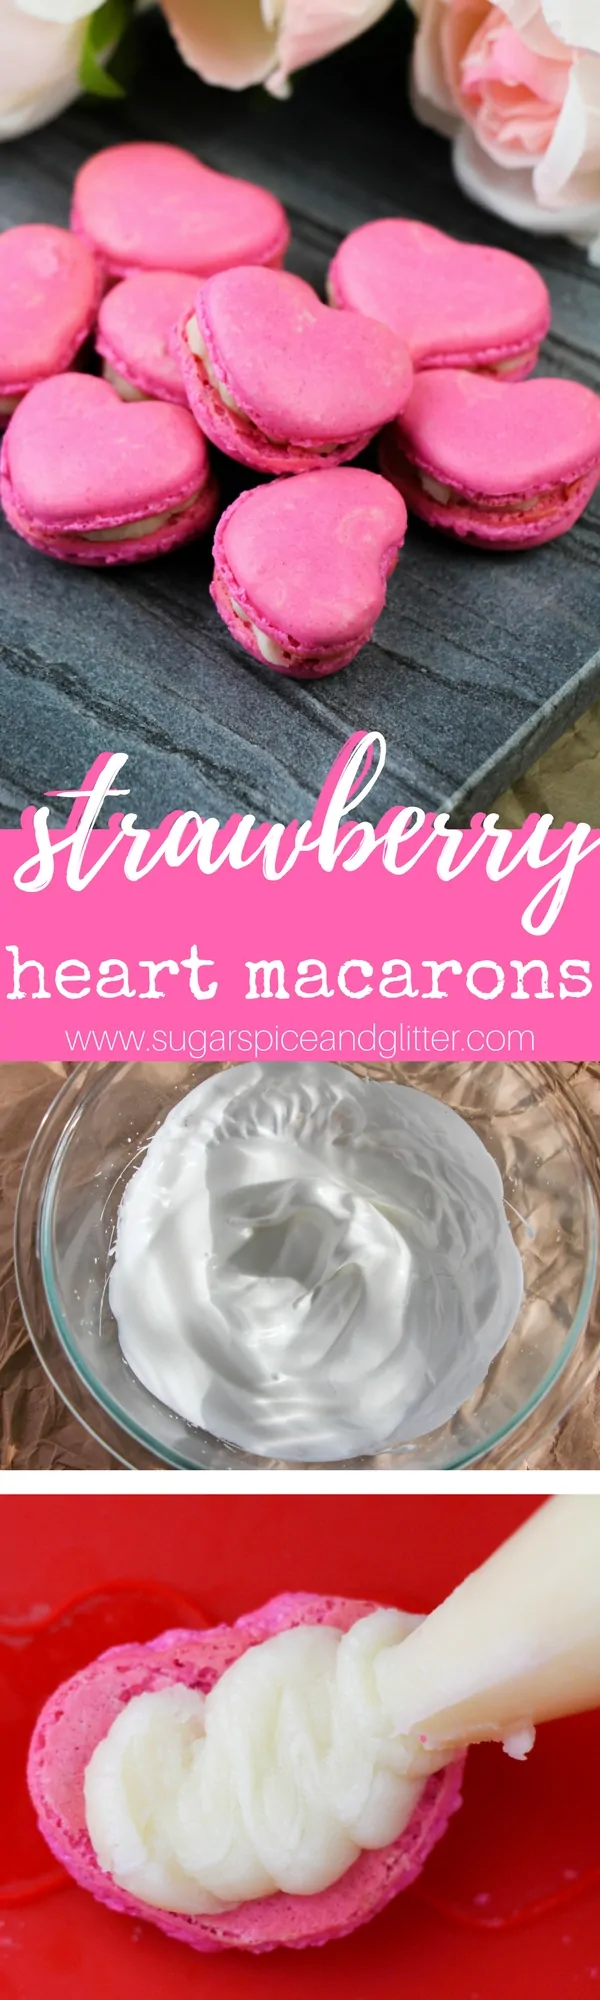 These cute heart-shaped macarons are the easiest macarons you will ever make! Strawberry macarons make a stunning Valentine's dessert, bridal shower dessert, or homemade anniversary gift